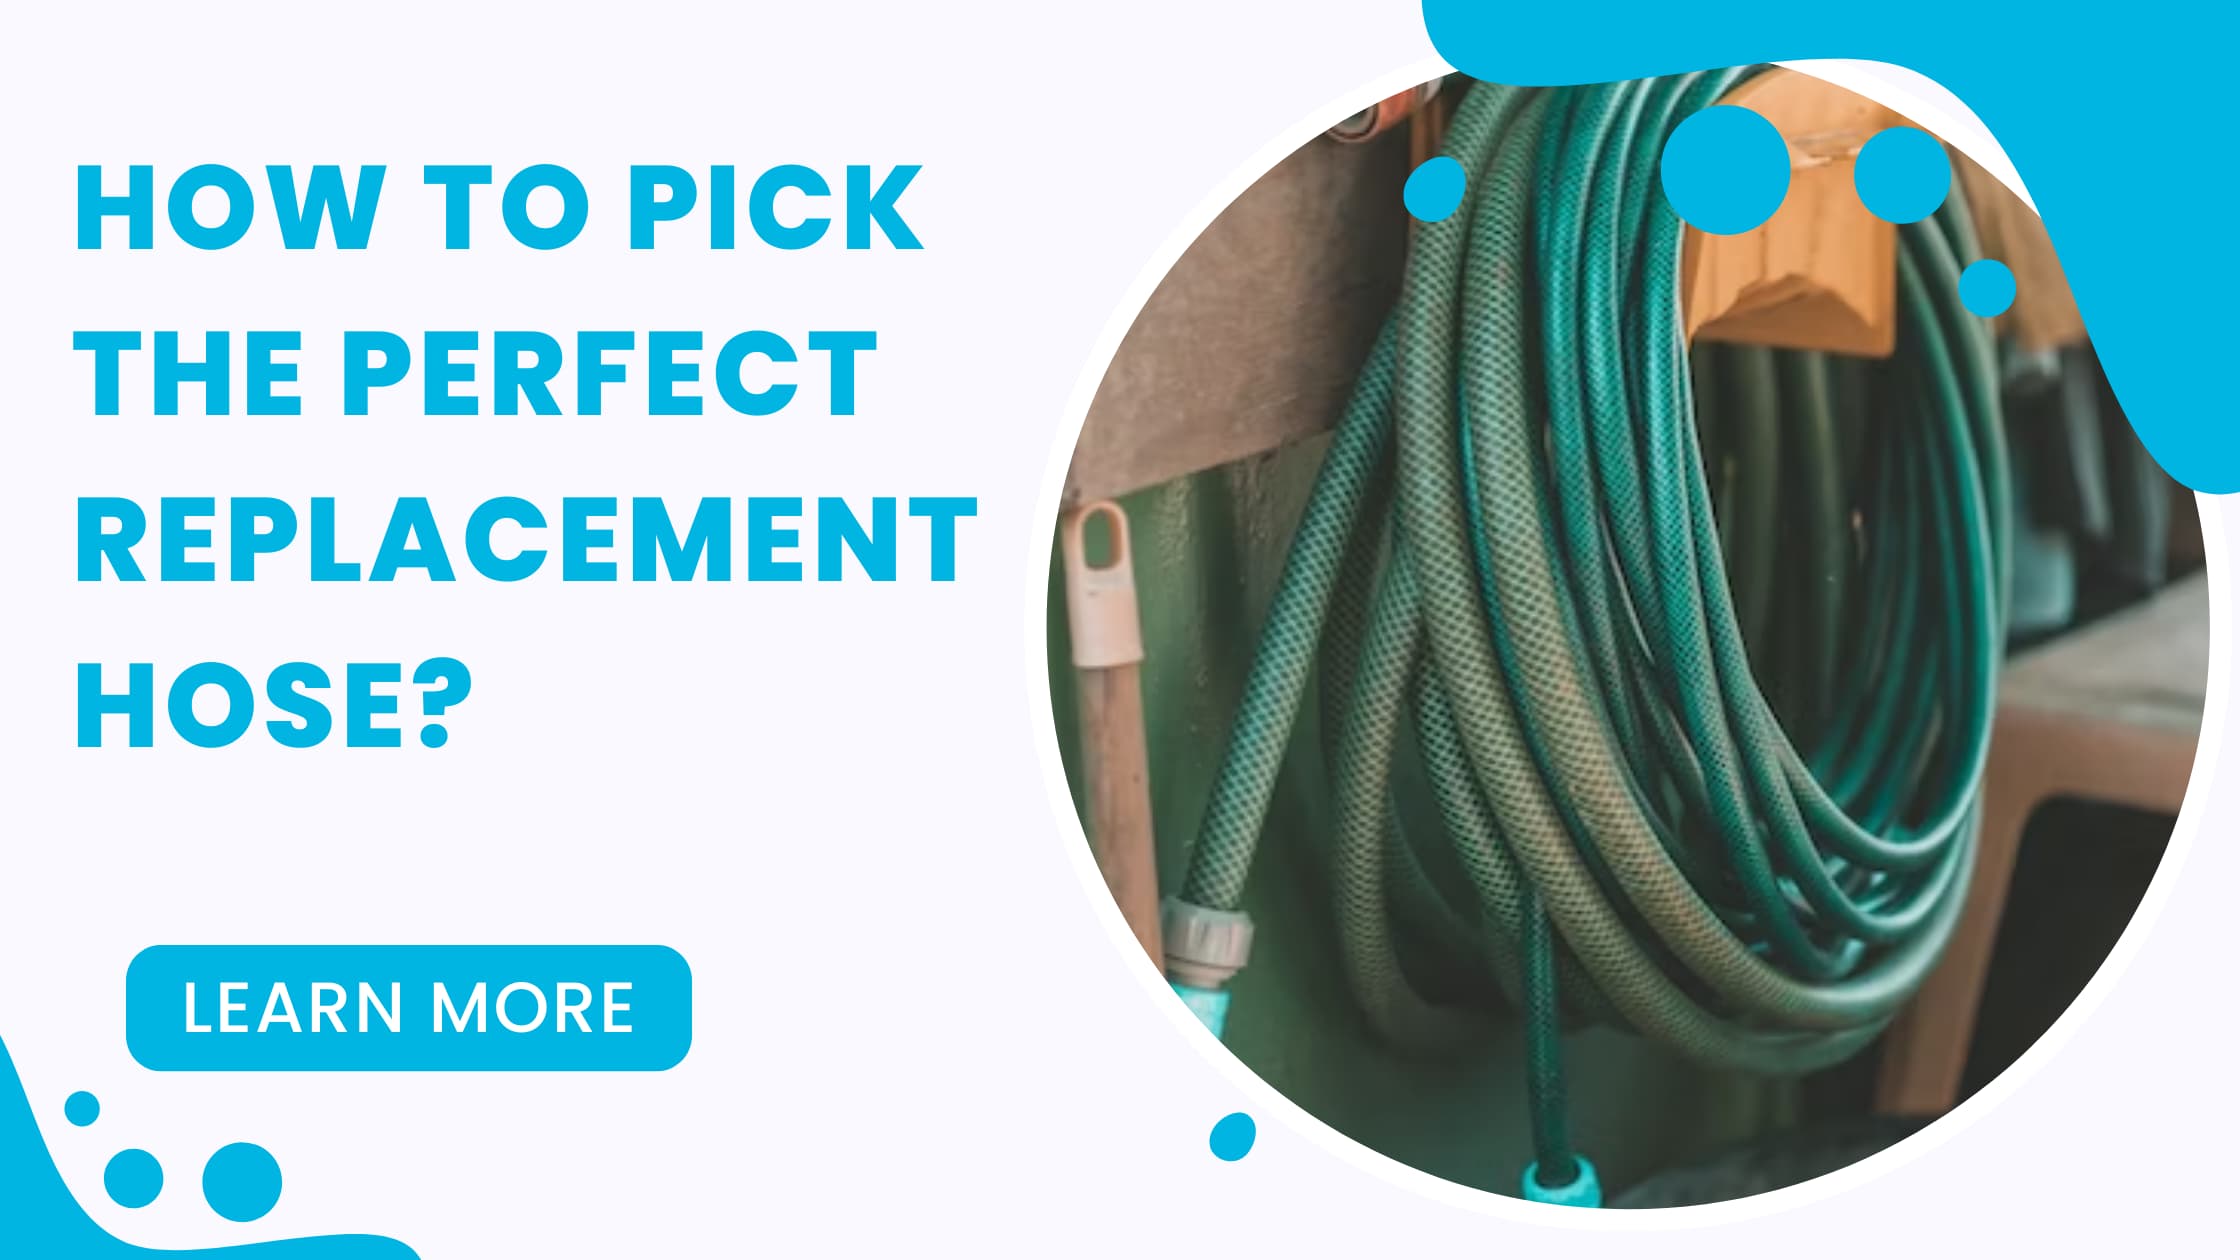 Pick the Perfect Replacement Hose